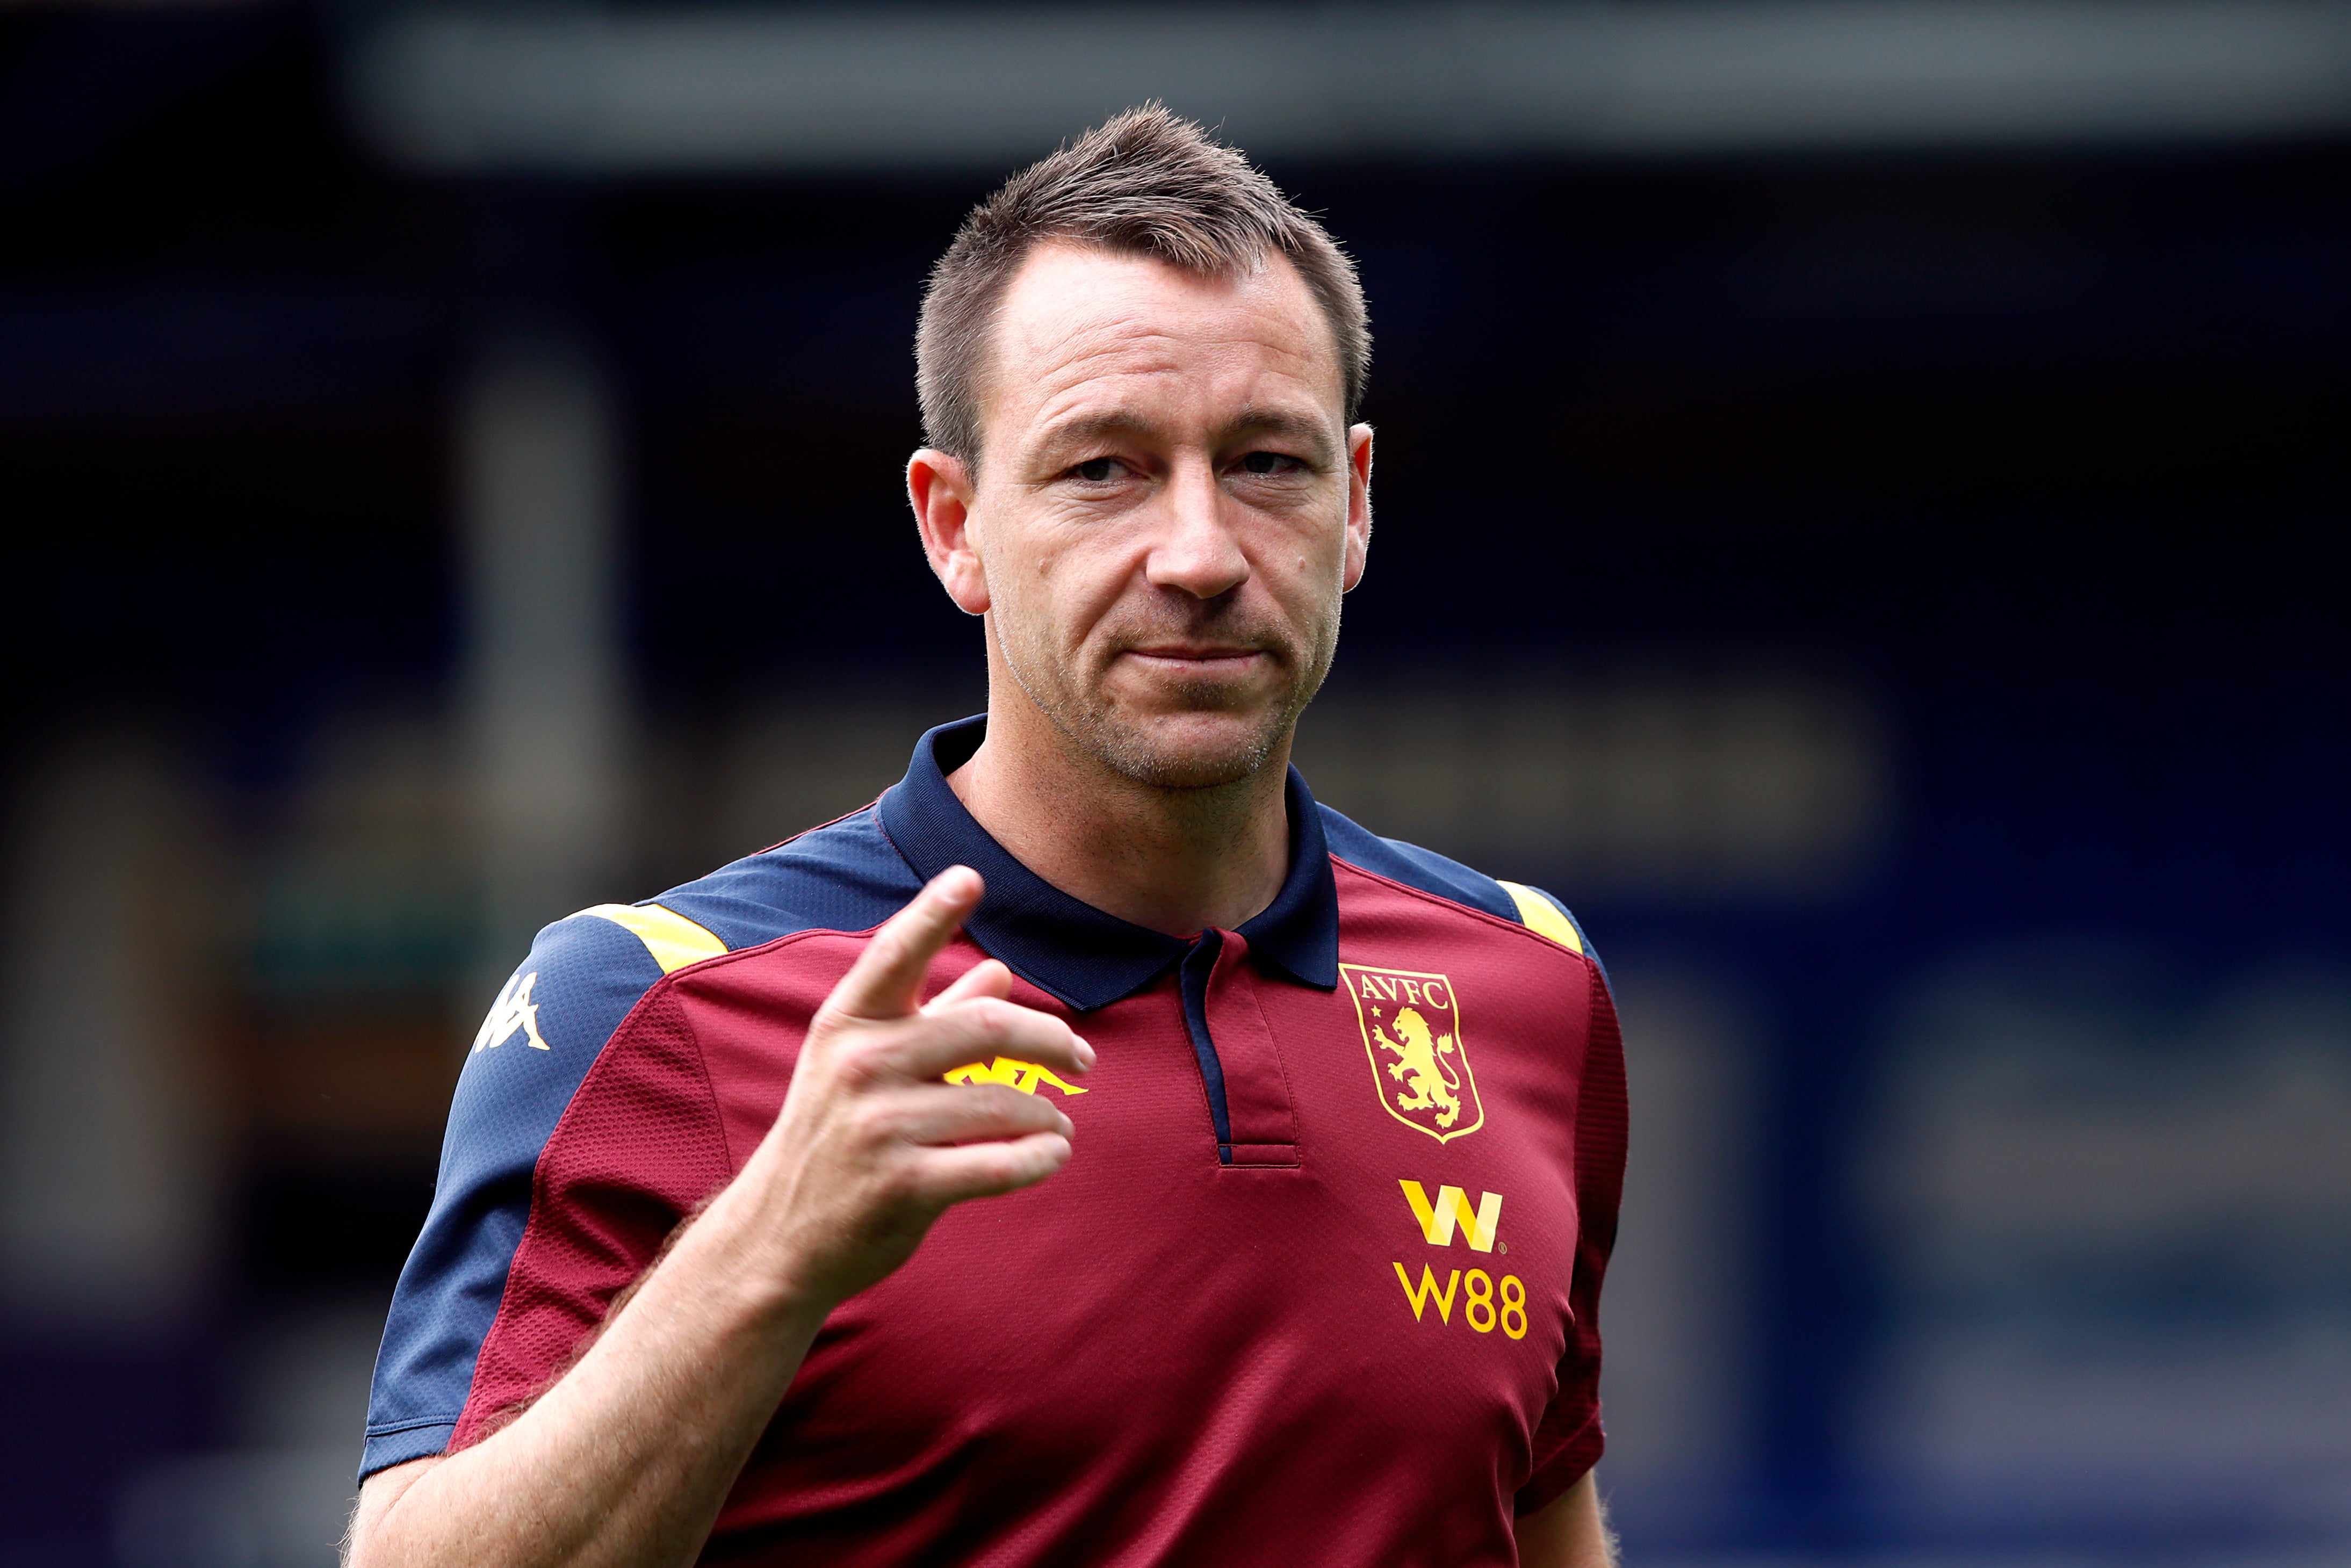 John Terry has left Aston Villa after captaining and then coaching at the club (Clive Brunskill/NMC Pool/PA)